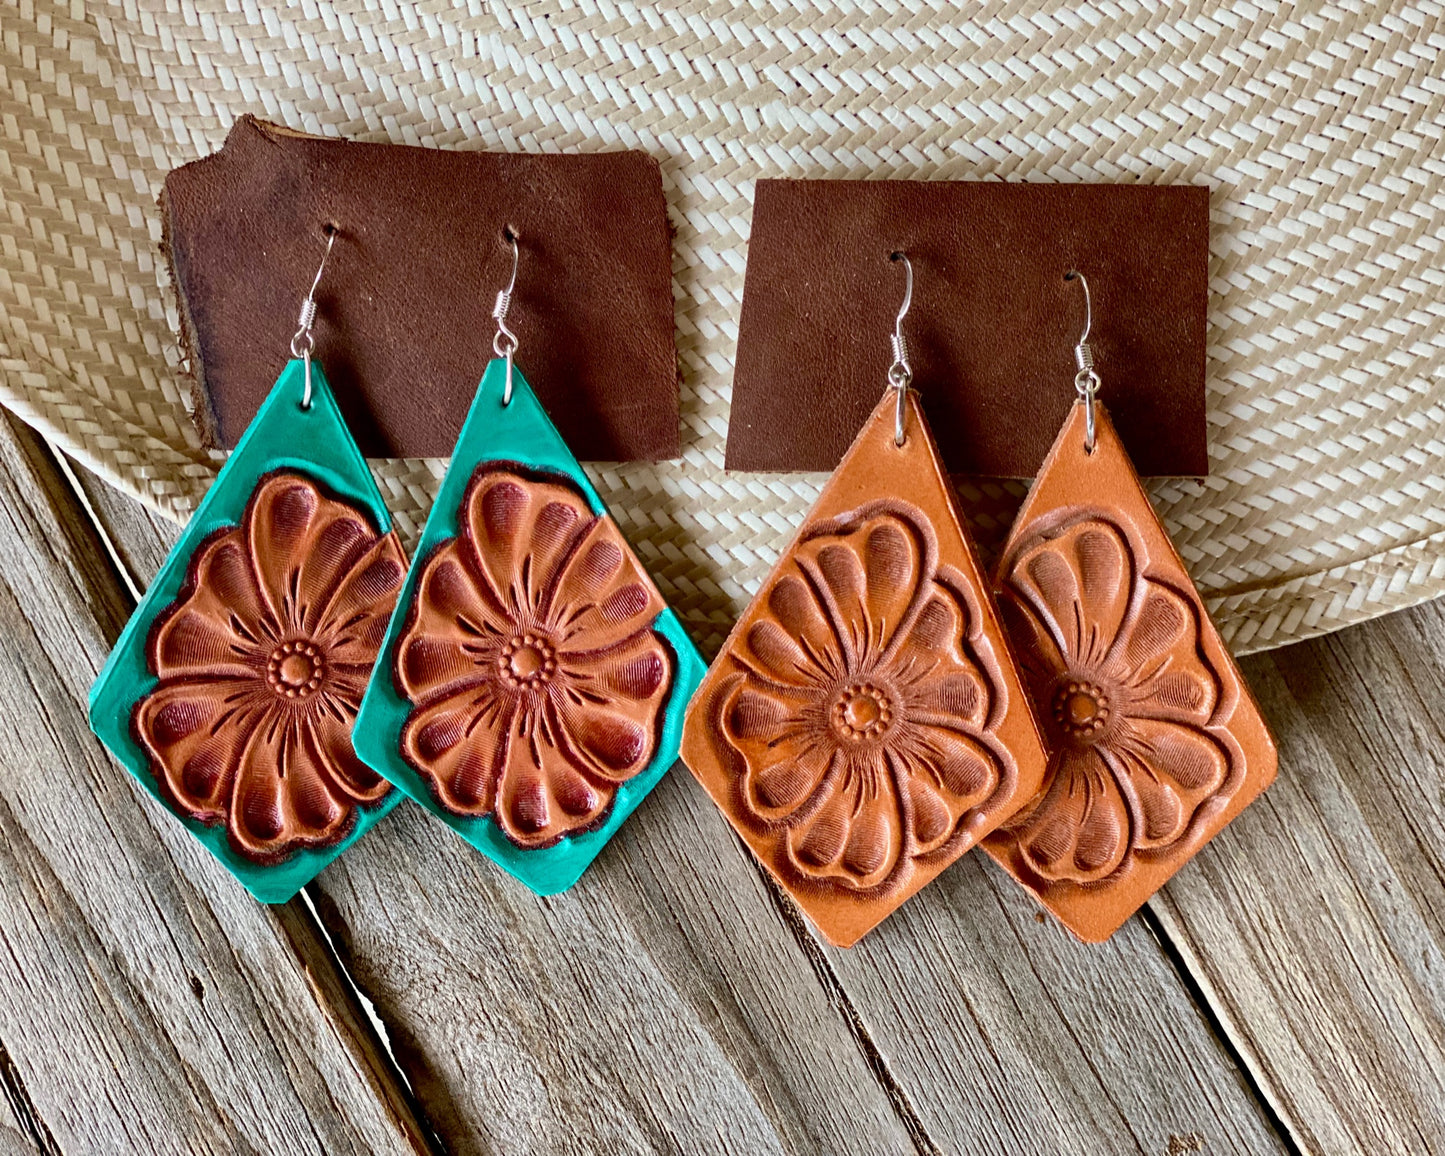 Tooled leather earrings